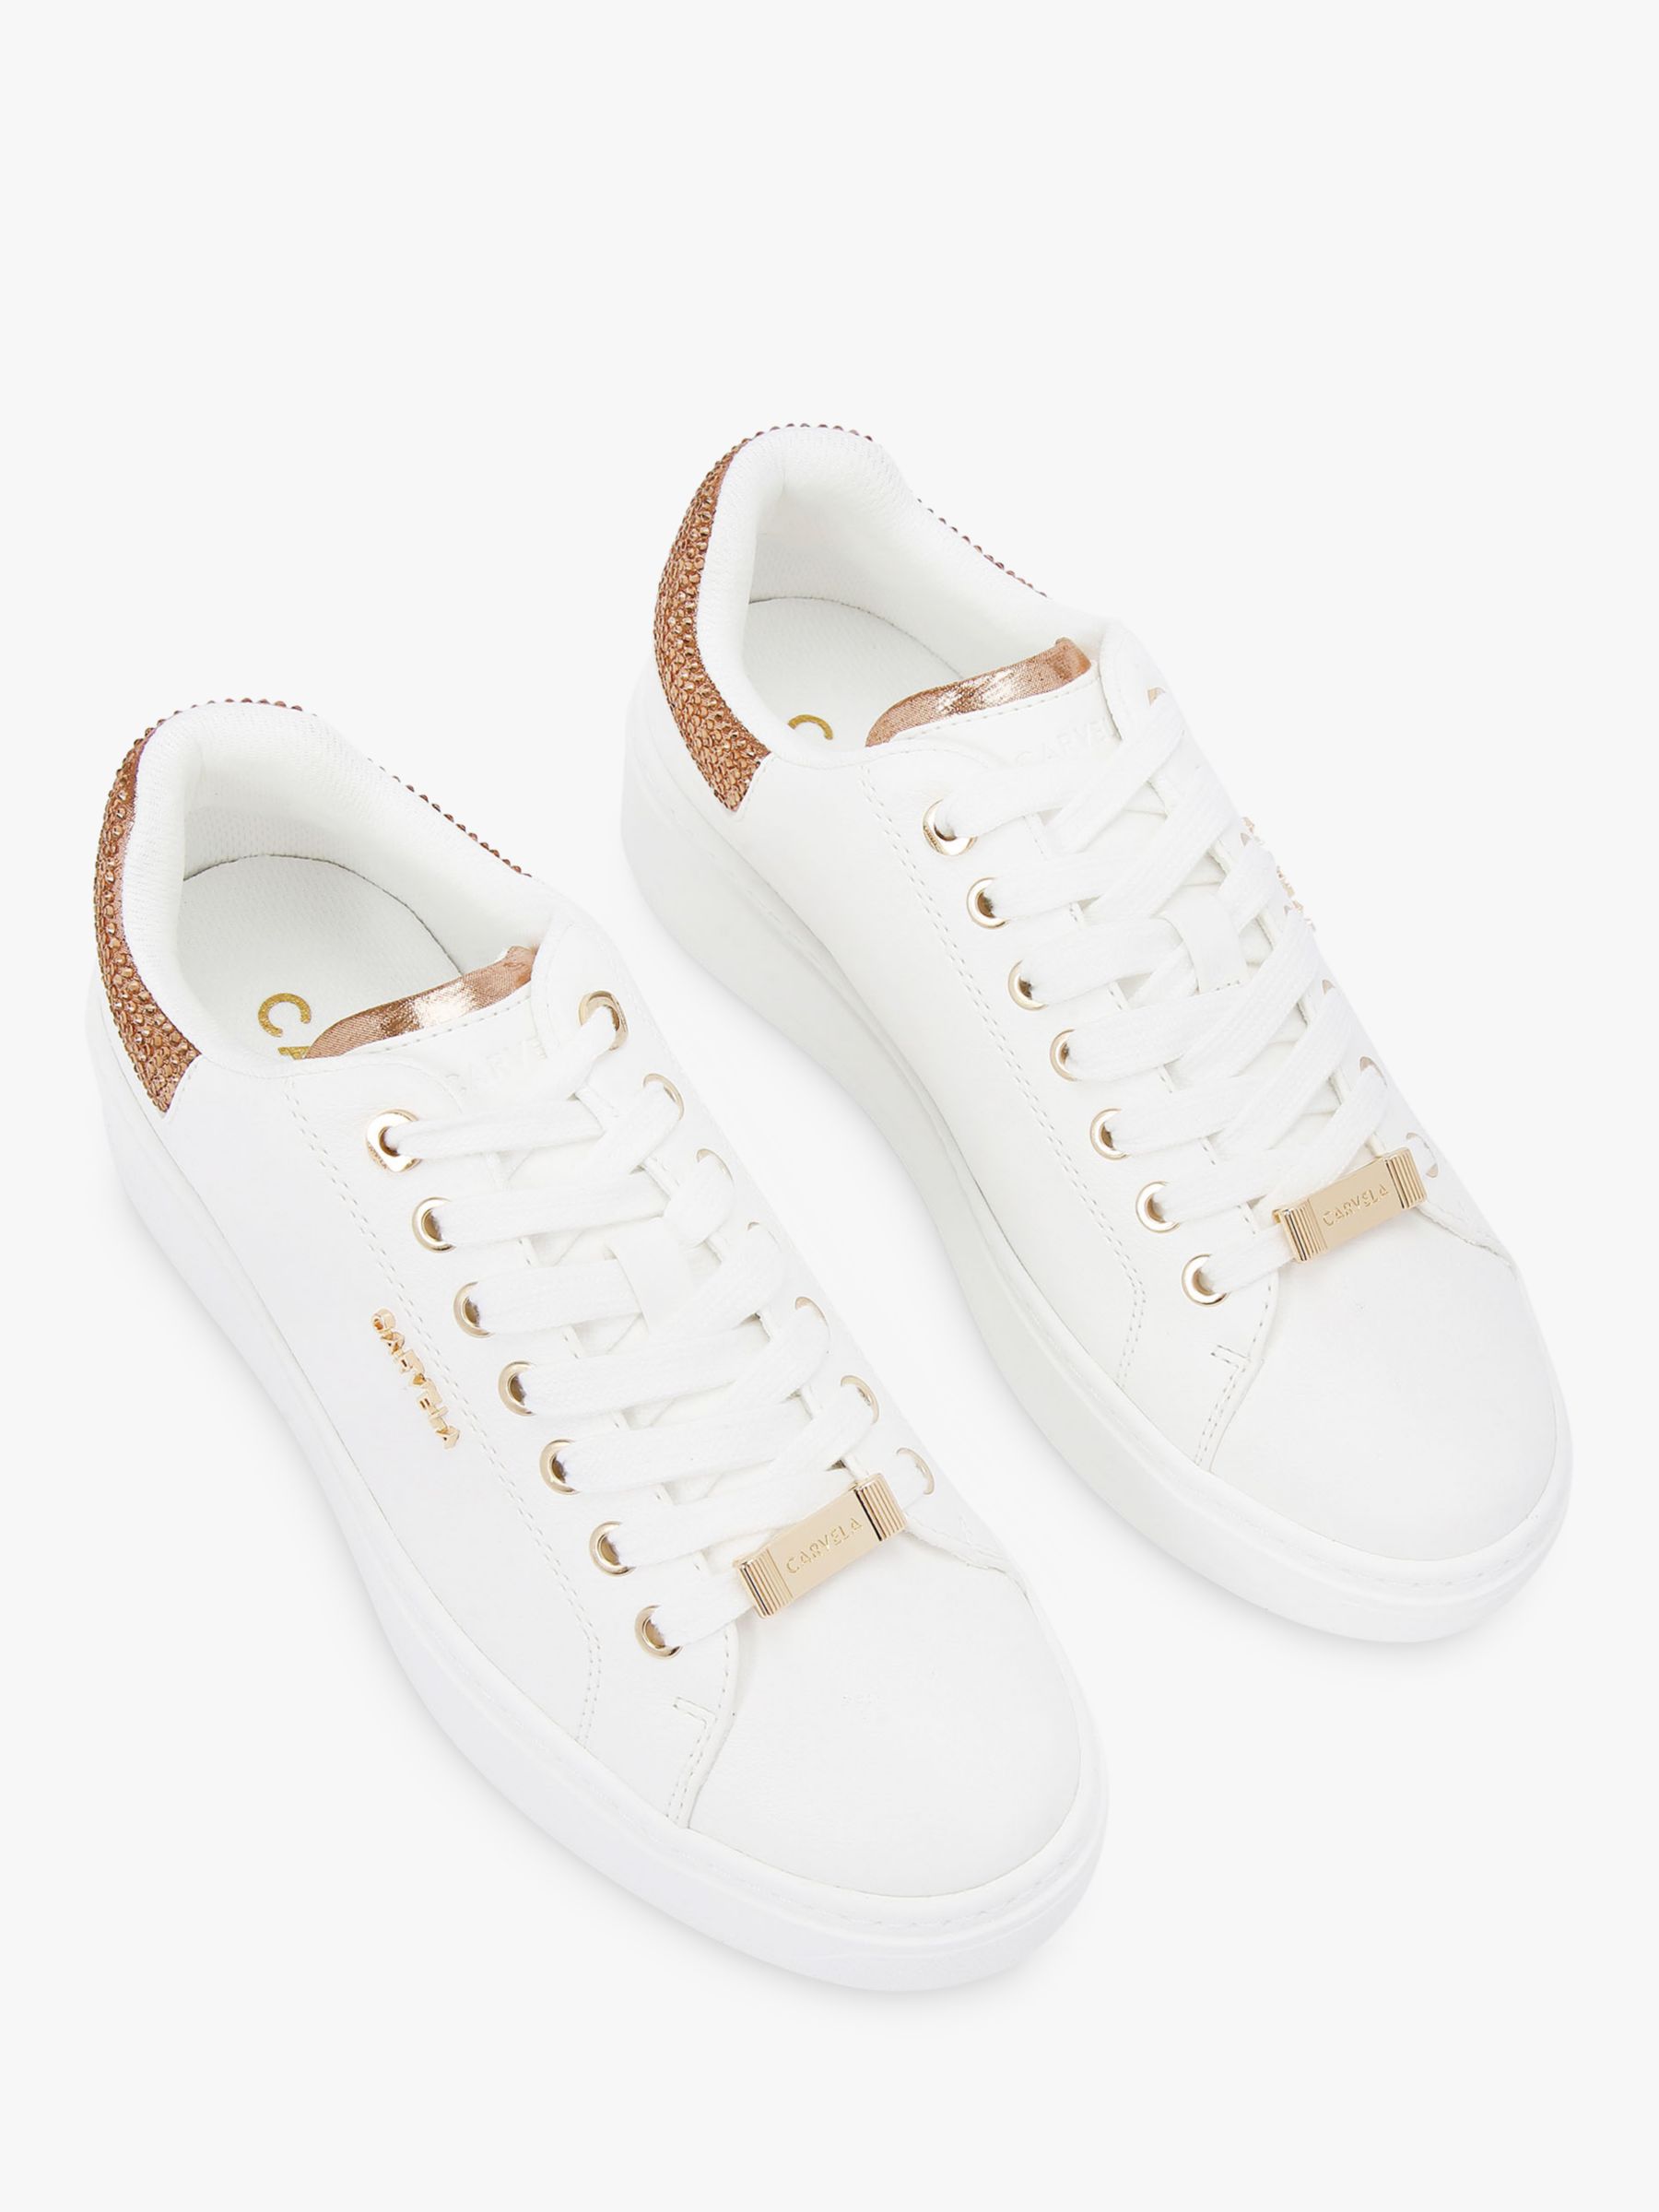 Carvela Dream Lace Up Trainers, White/Gold Stud at John Lewis & Partners